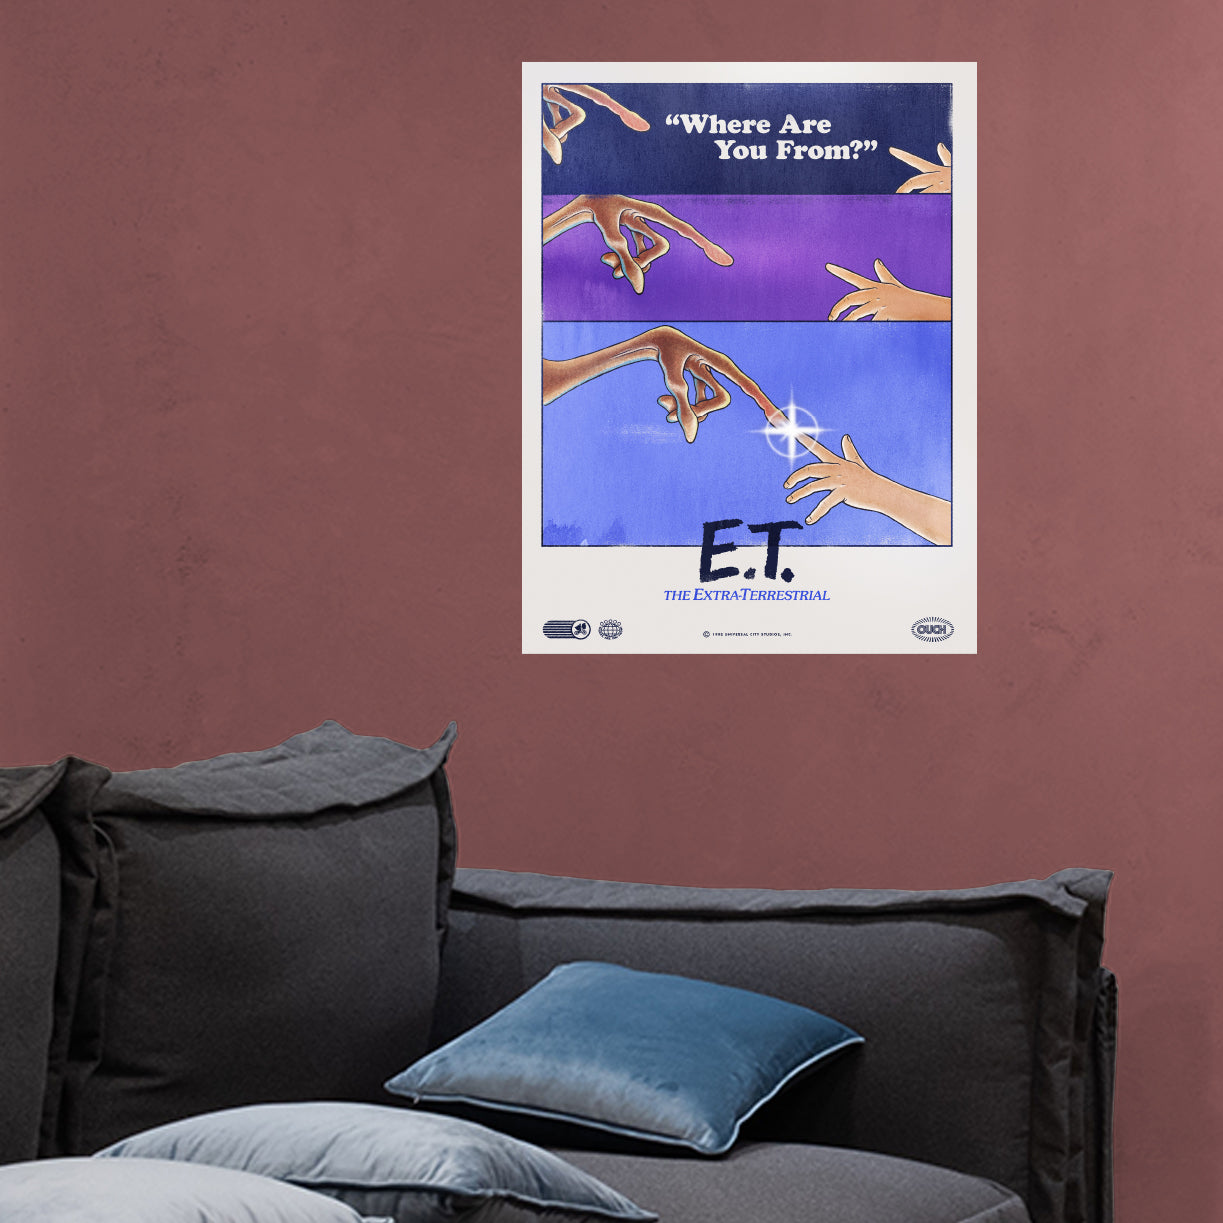 E.T.: E.T. Where Are You From? 40th Anniversary Graphic Poster - Officially Licensed NBC Universal Removable Adhesive Decal